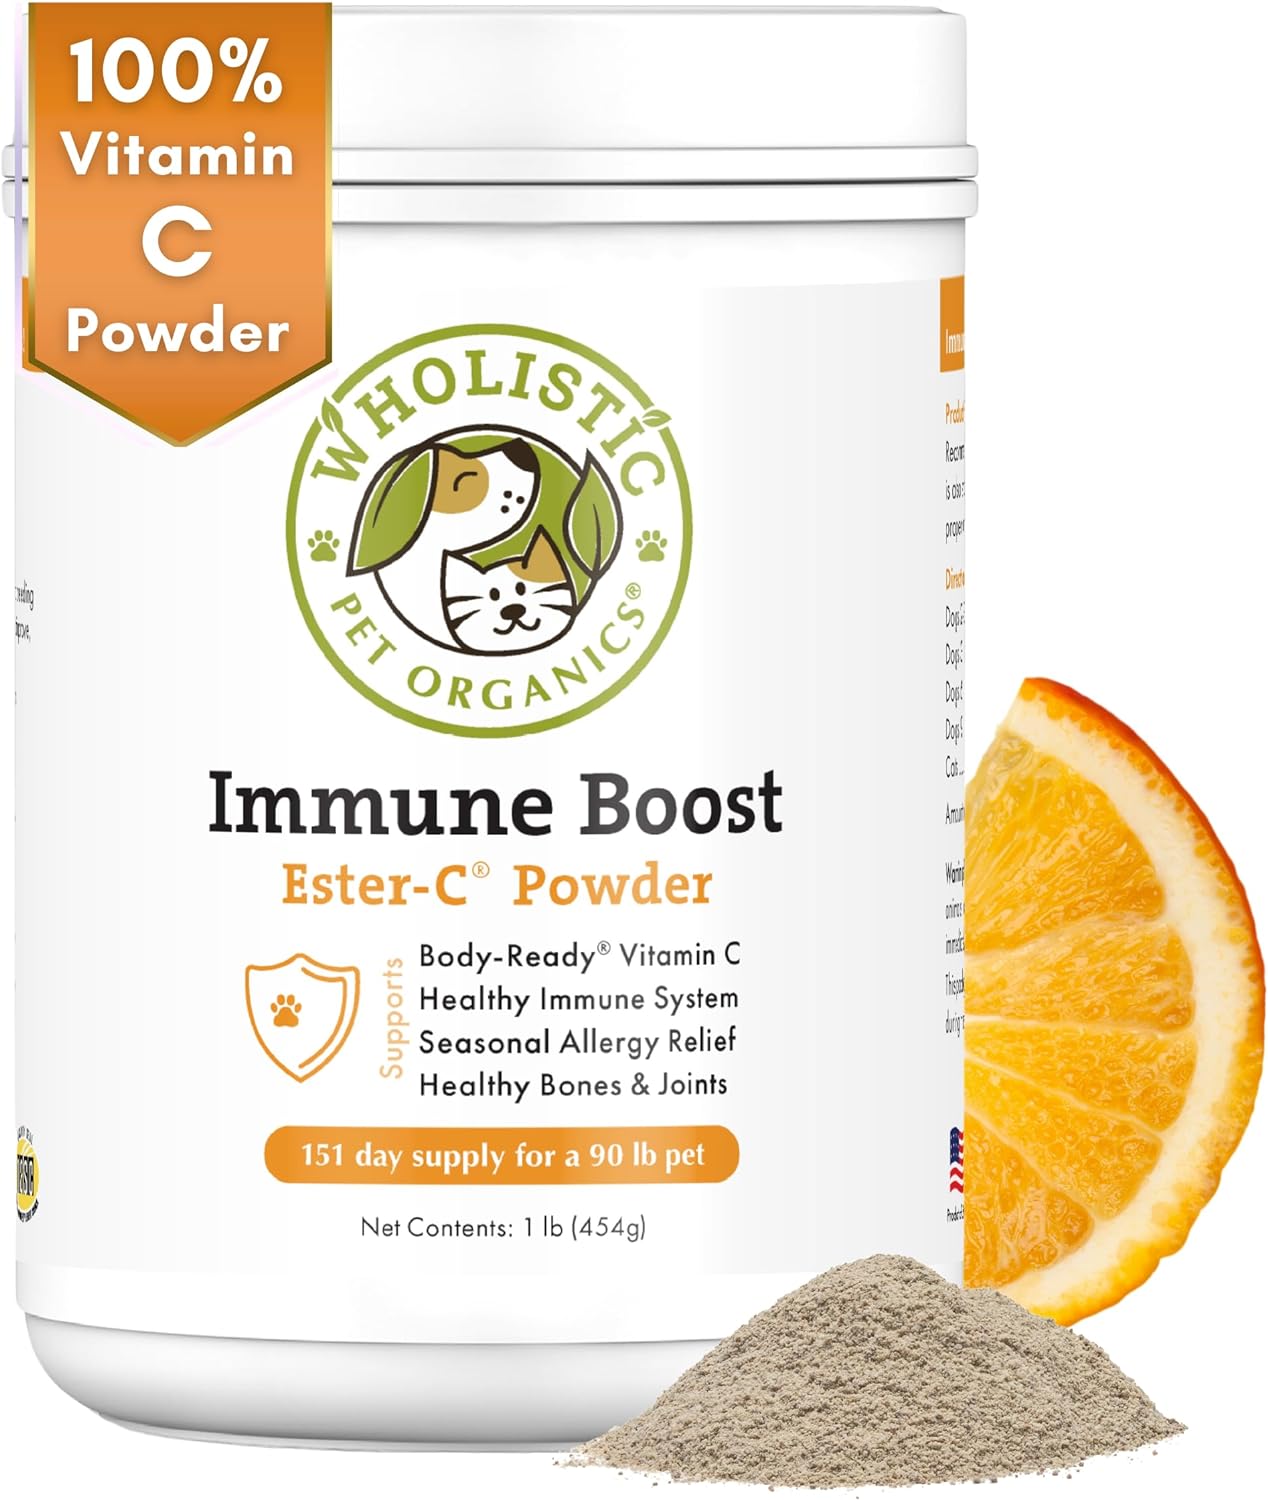 Wholistic Pet Organics Allergy Immune Boost: Vitamin C for Dogs Skin and Coat Supplement - 1 lb - Dog Allergy Relief Medication for Dogs - Dog Itch Relief - Ester C Dogs Supplement and Vitamin Powder